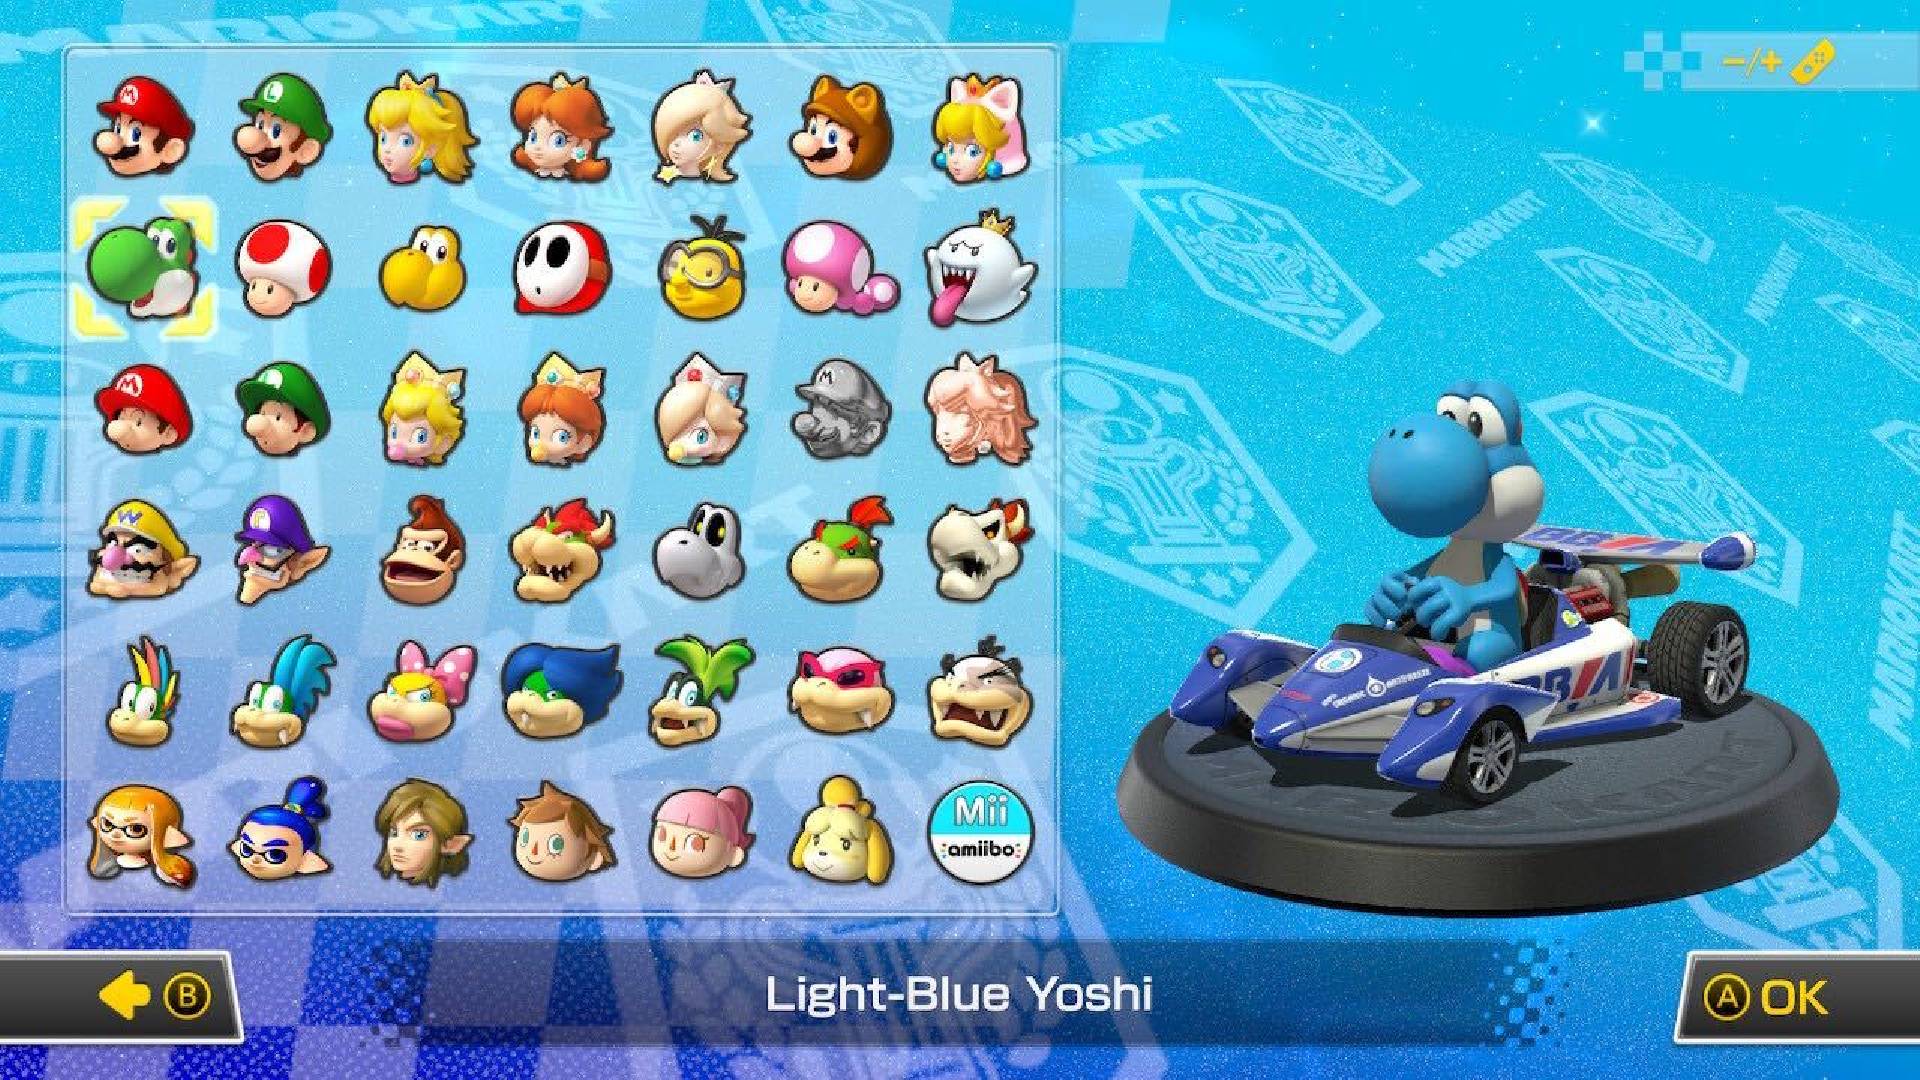 Yoshi is visible on a character selection screen, sitting in a kart